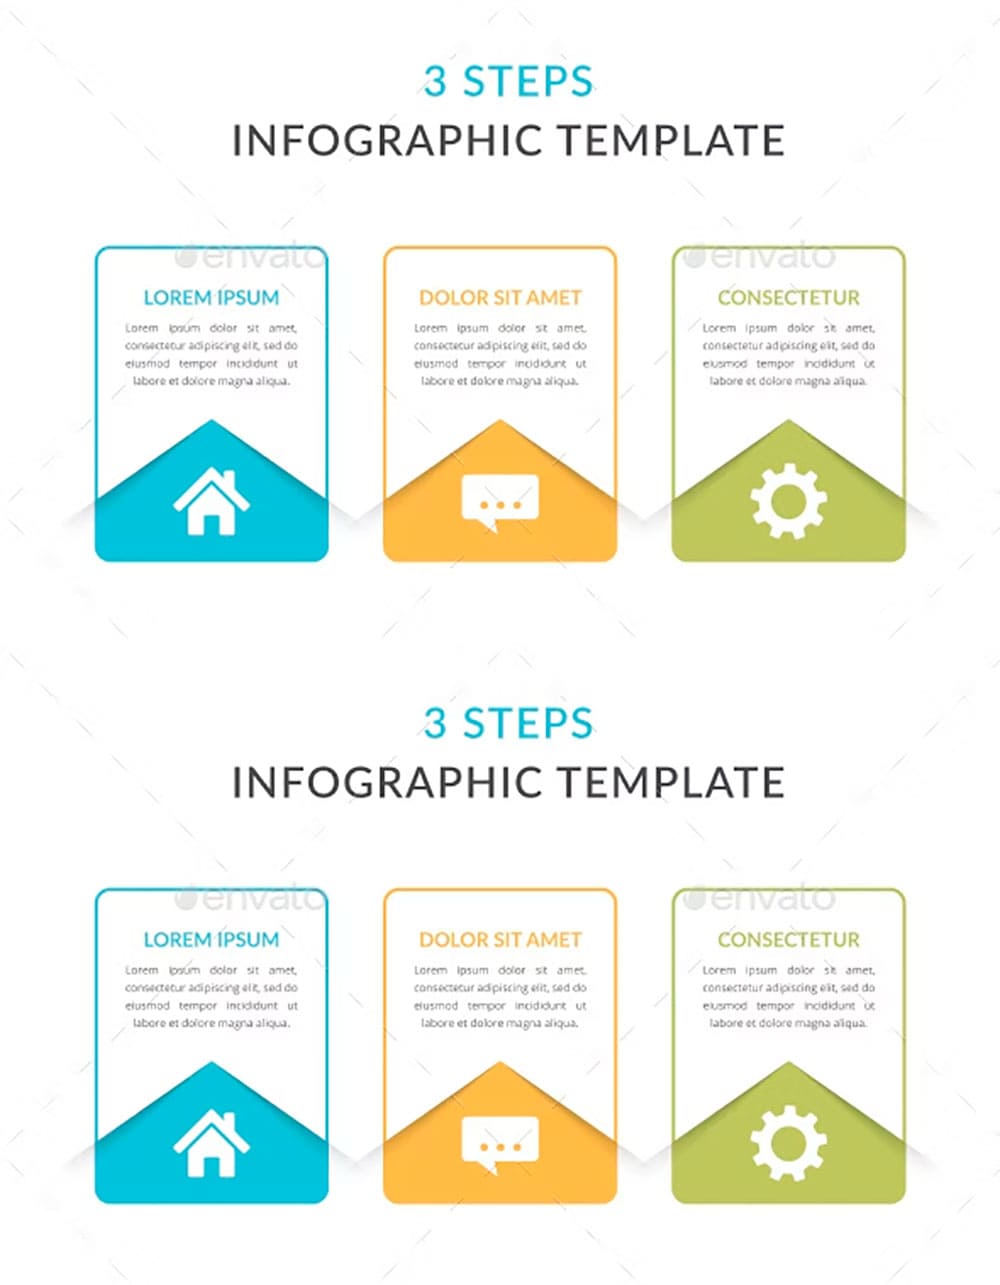 3 steps infographic template, picture for pinterest.